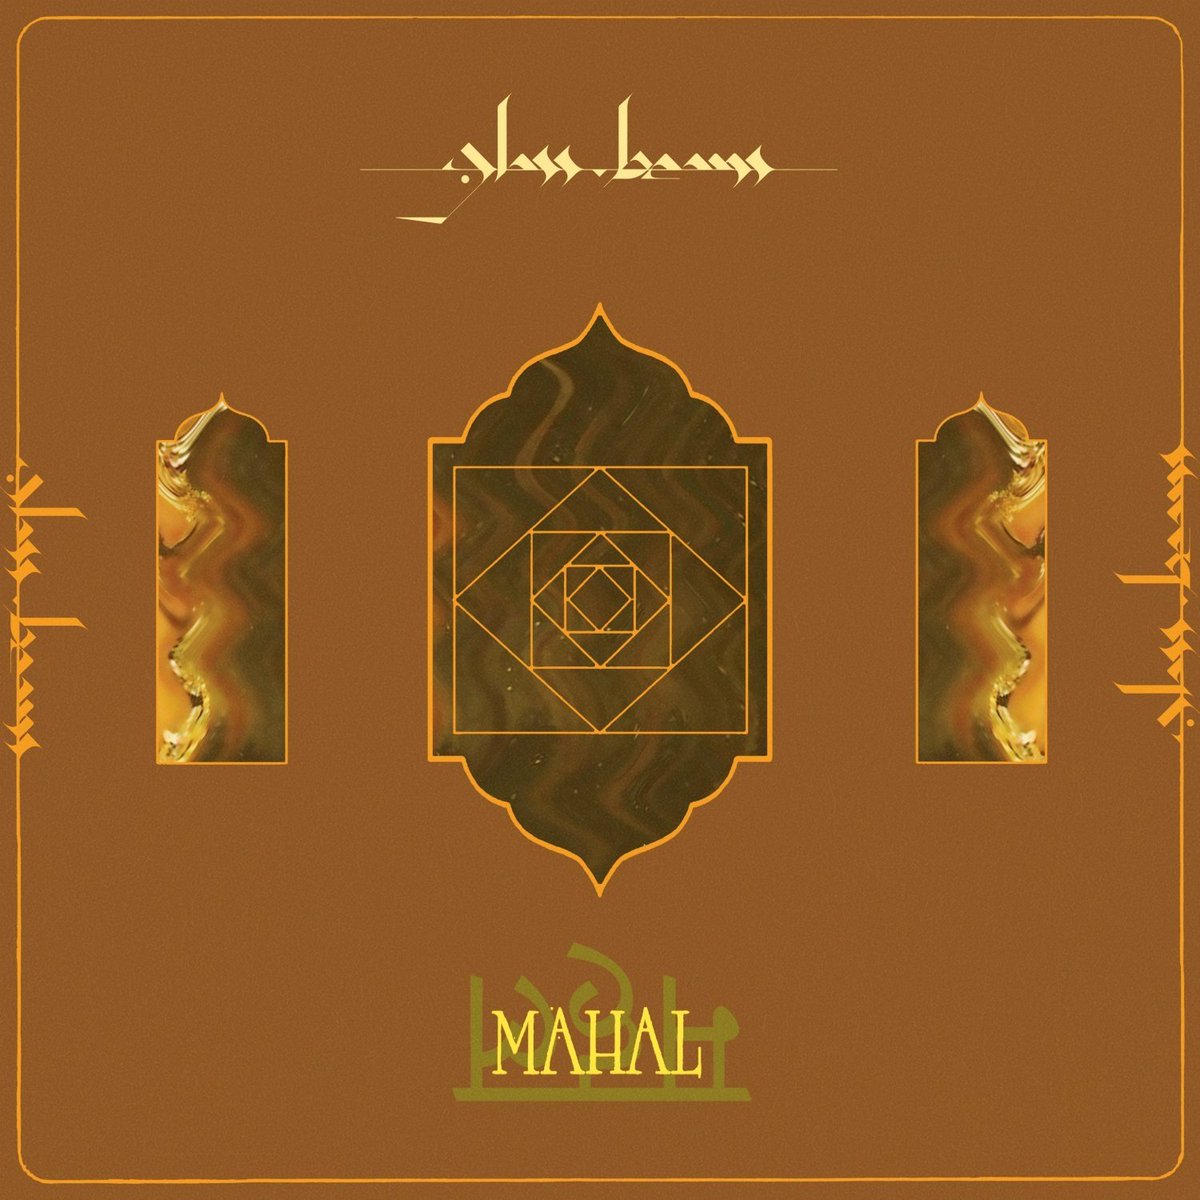 #NowPlaying #HeadphoneListening @glass_beams Glass Beams - Mahal from 2024 on @ninjatune and many thanks to @theoboyce for the recommendation